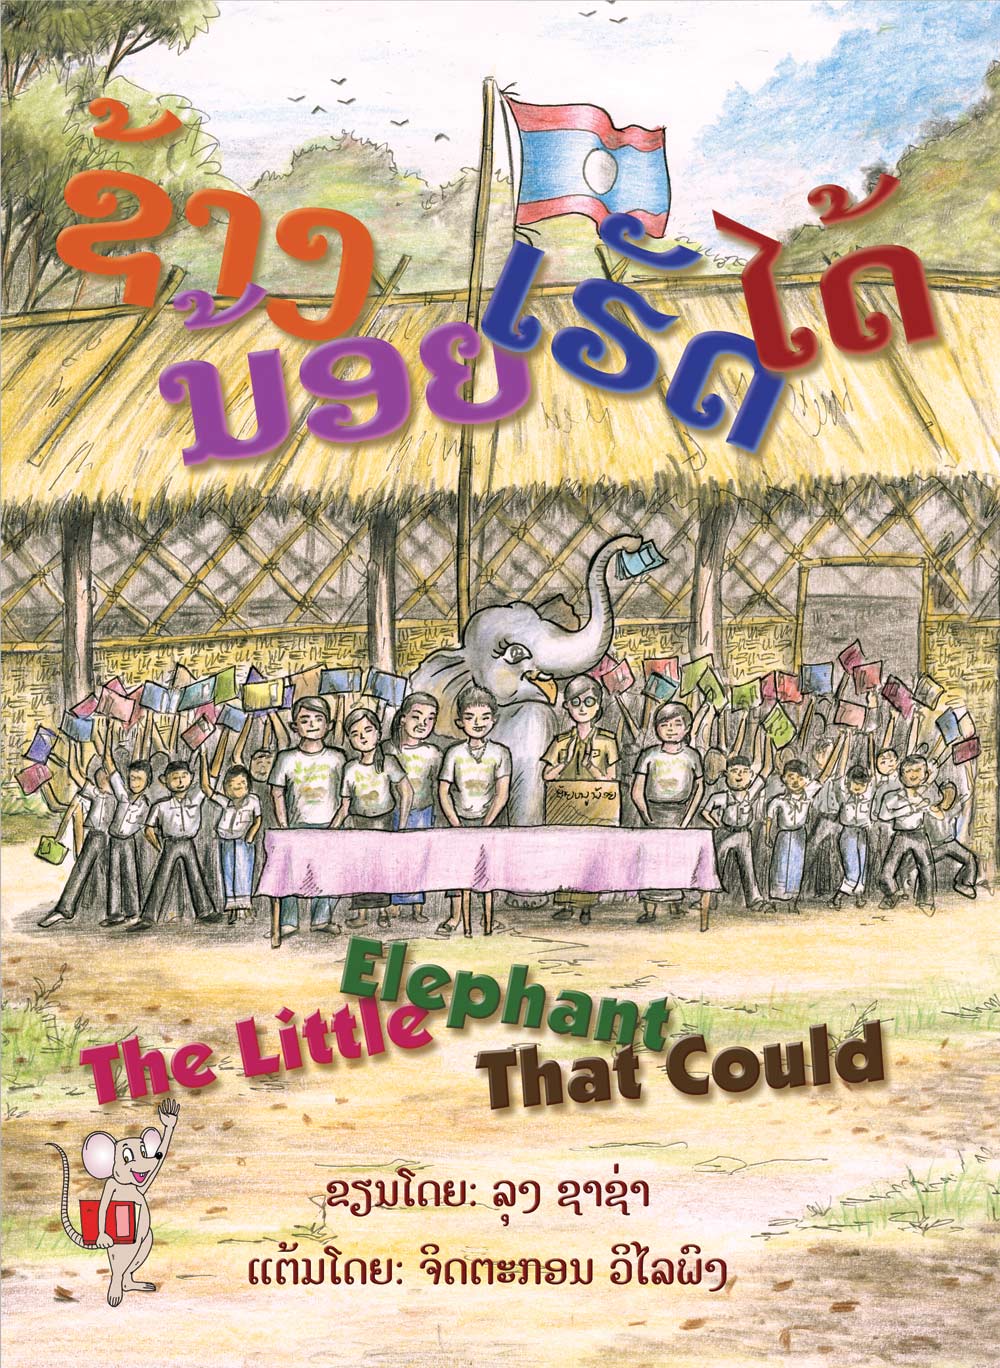 The Little Elephant That Could large book cover, published in Lao and English